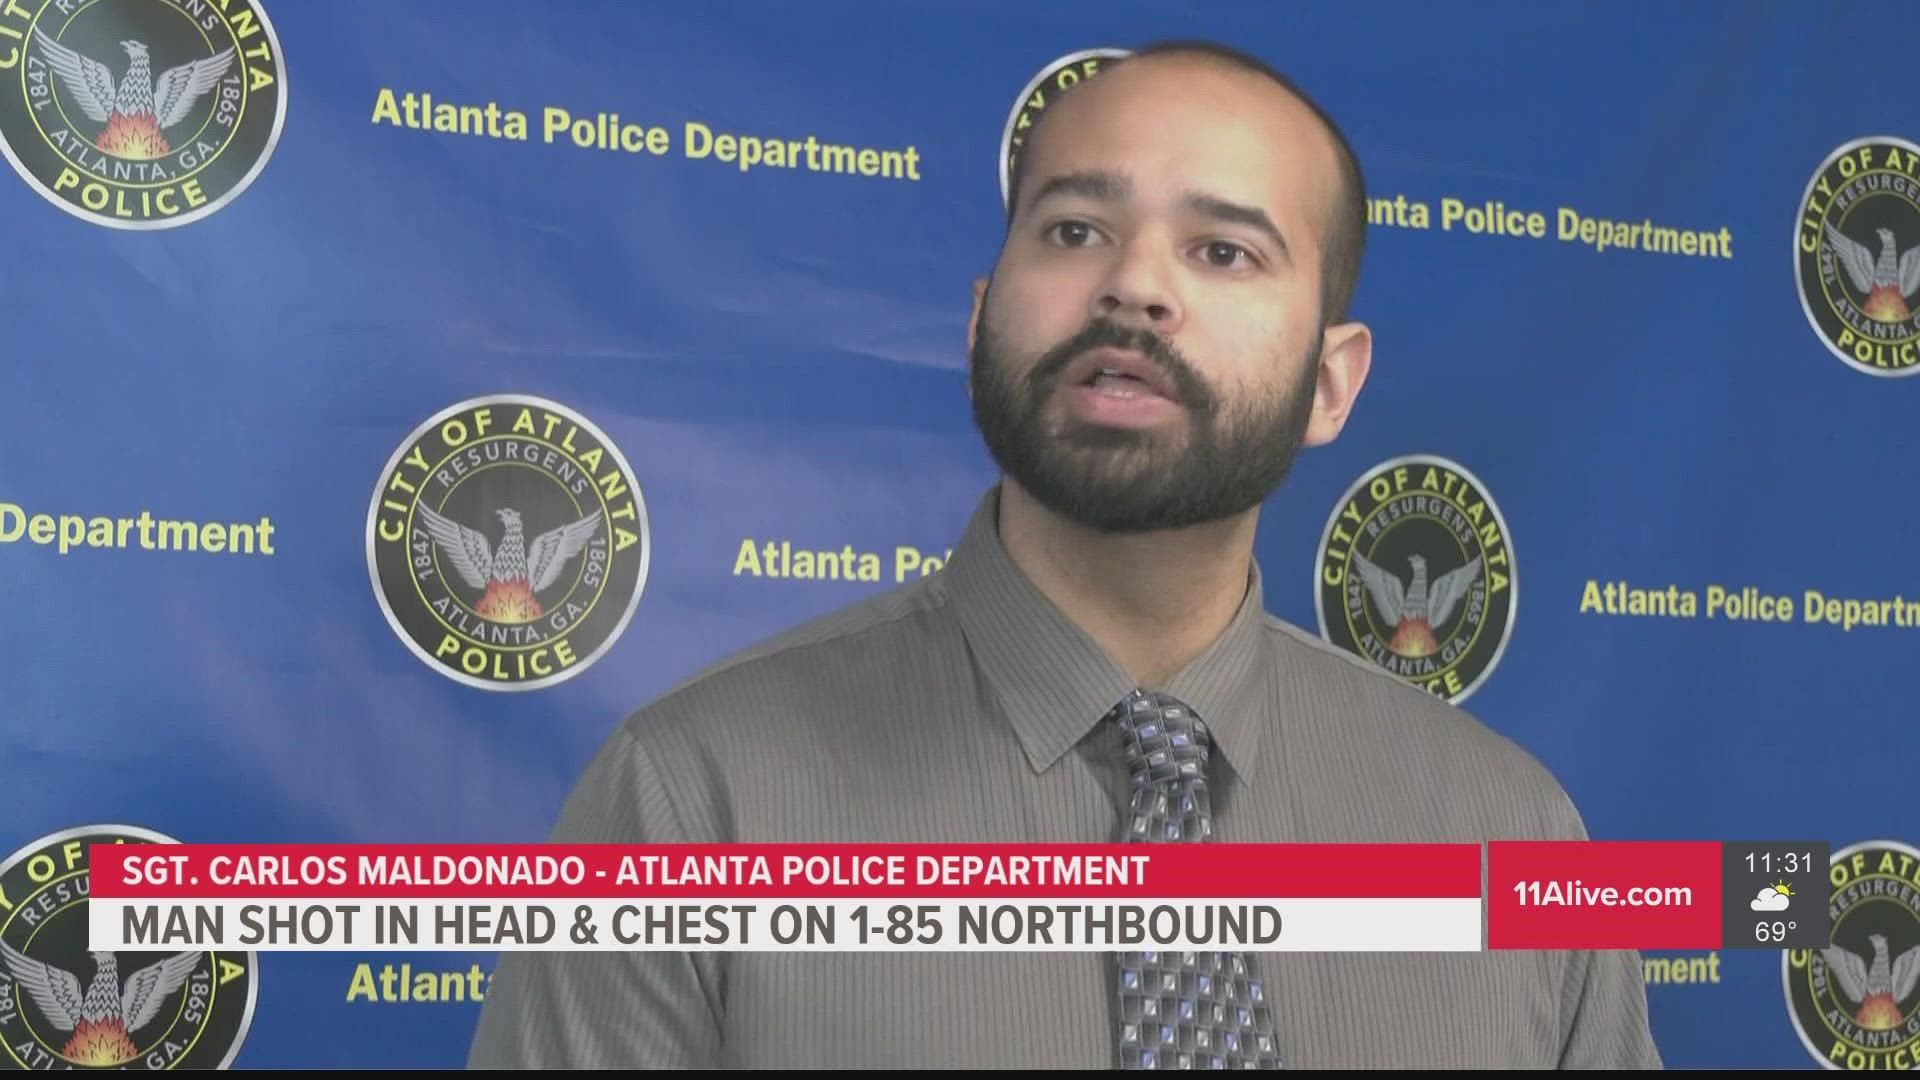 Atlanta Police are investigating a shooting that occurred on I-85 near Georgia 400 northbound.